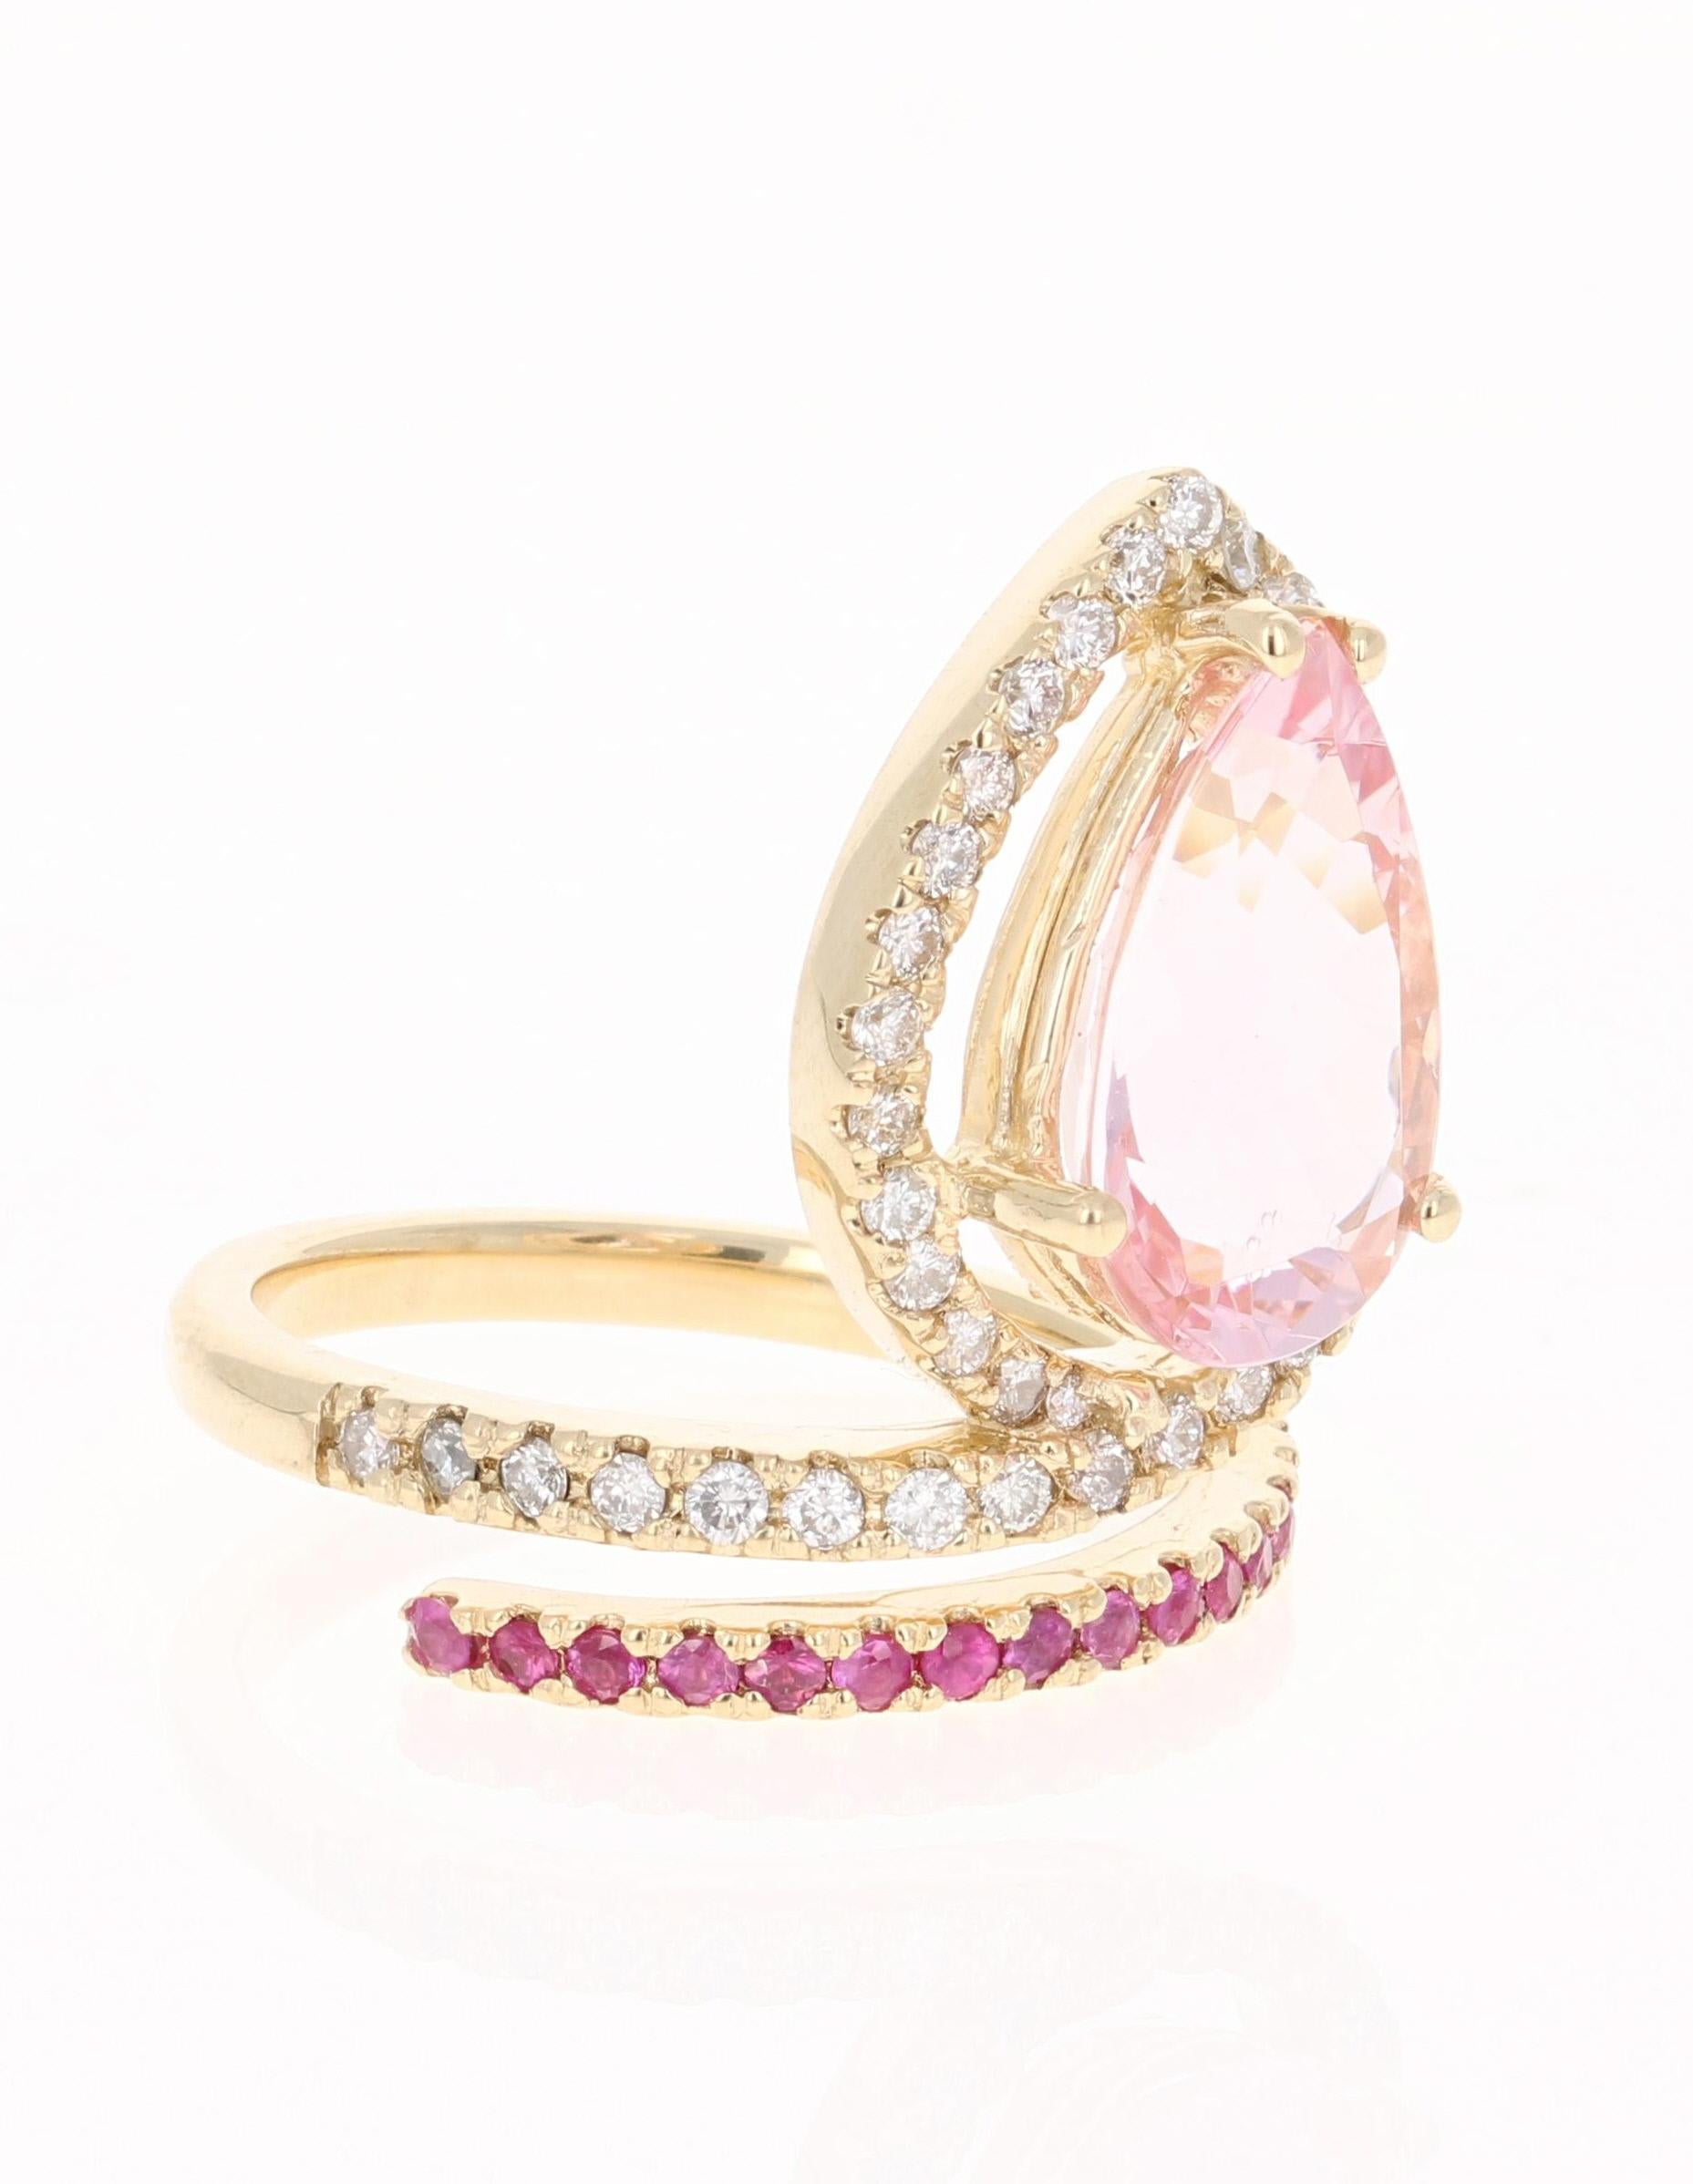 An affordable alternative to a Pink Diamond!

This beautifully and uniquely crafted ring has large Pear Cut Pink Morganite that weighs 3.48 carats as its center stone.  And it is surrounded by 36 Round Cut Diamonds that weigh 0.50 carats.  The